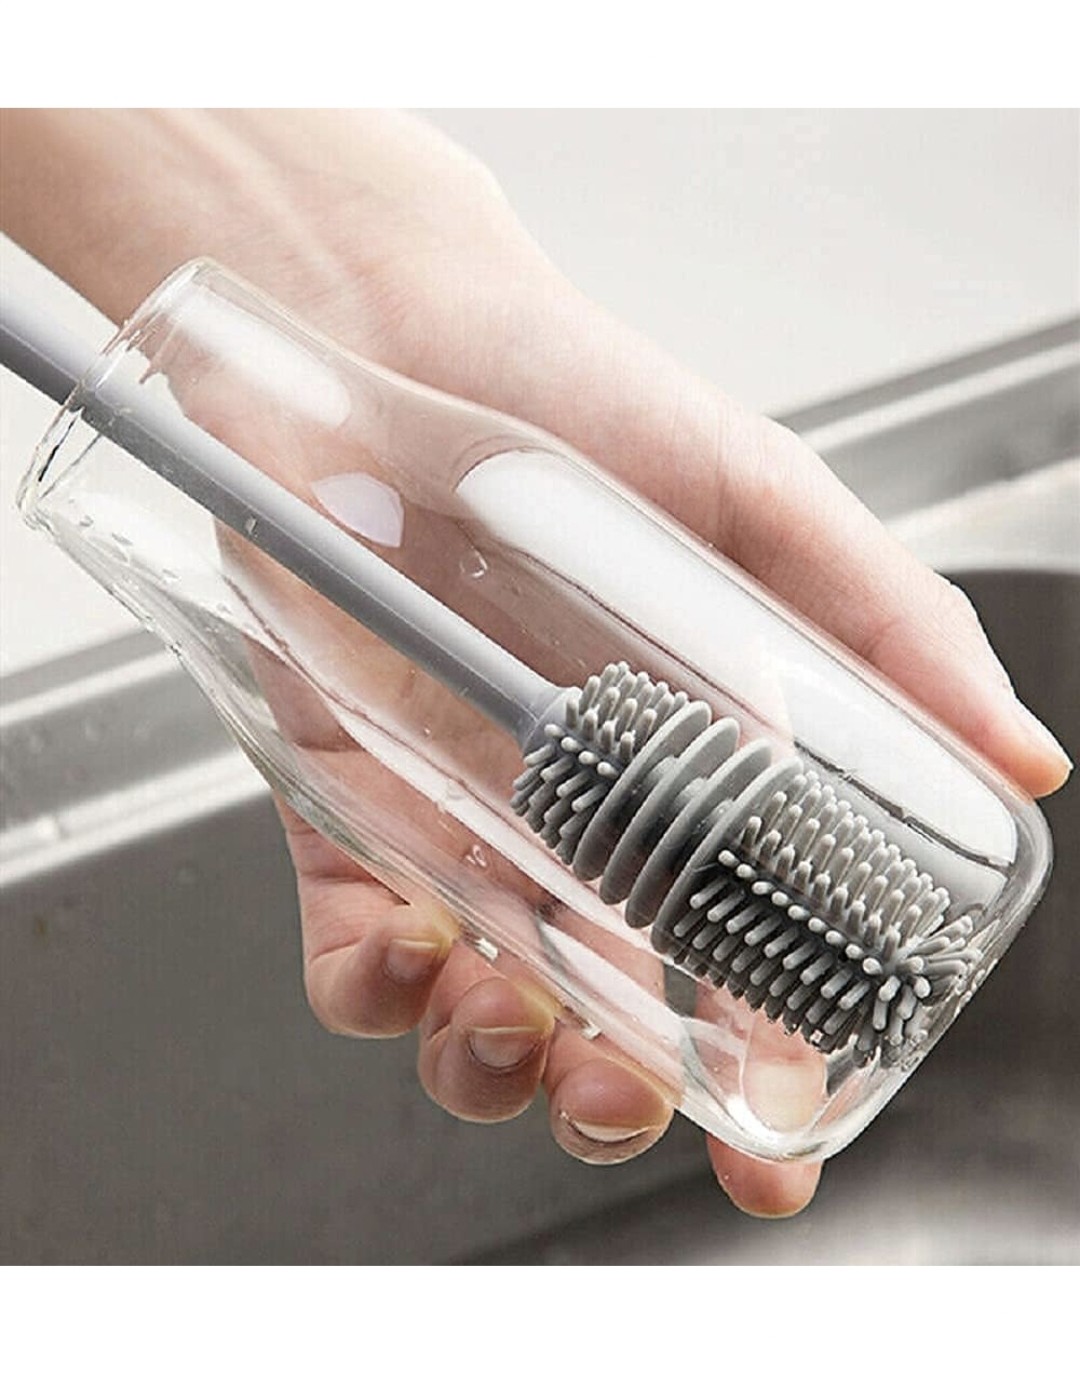 Imoa Traders- bottle cleaning brush